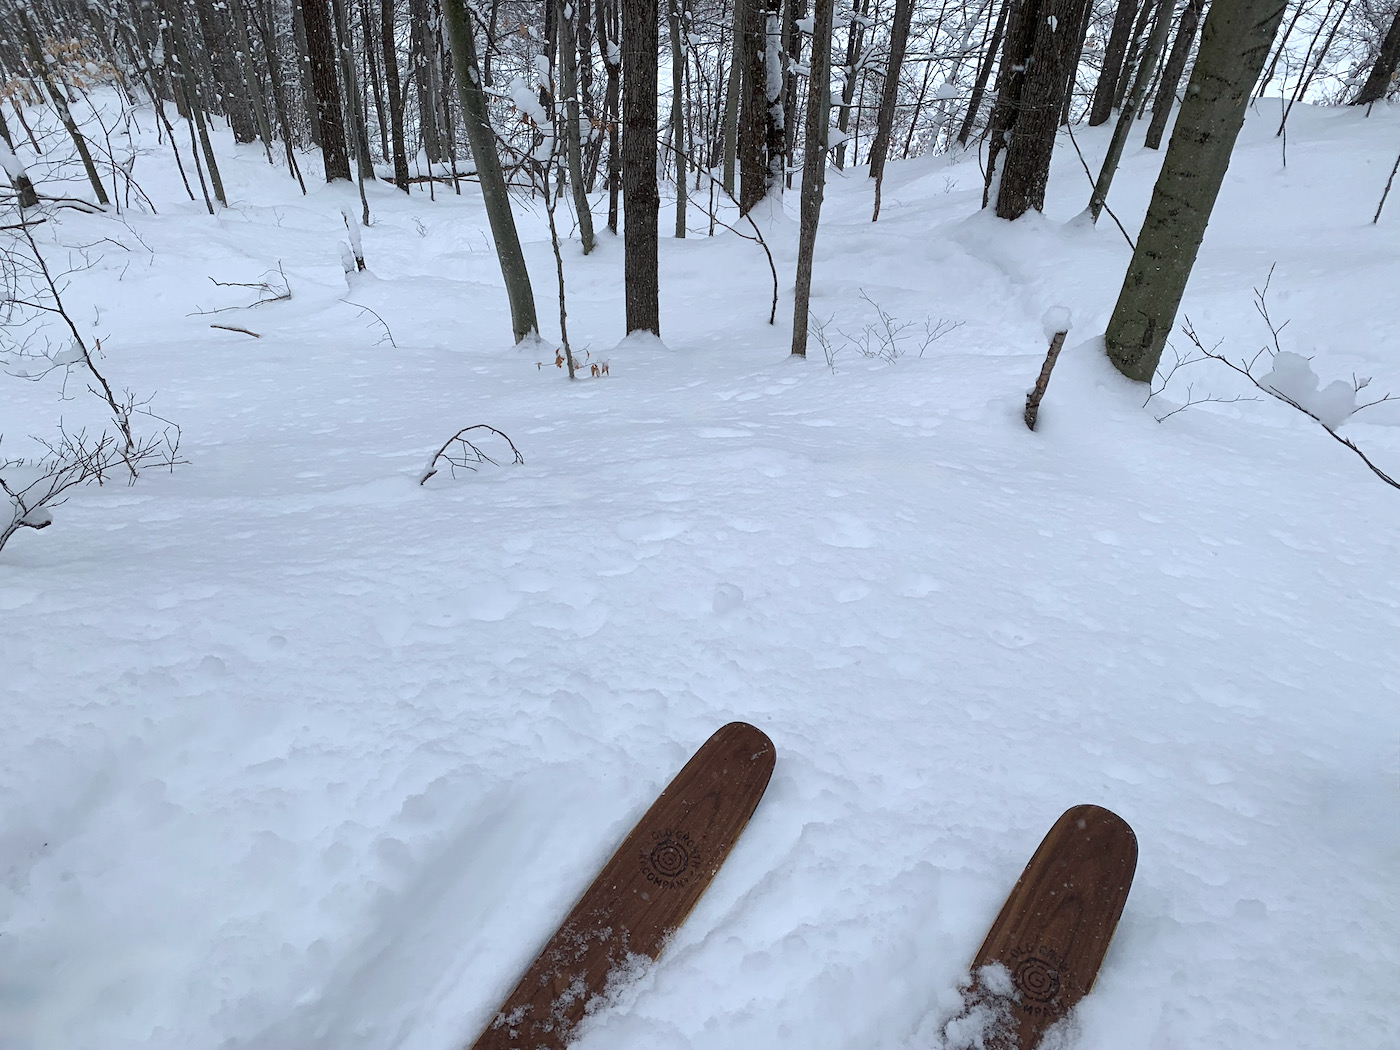 Old Growth Skis